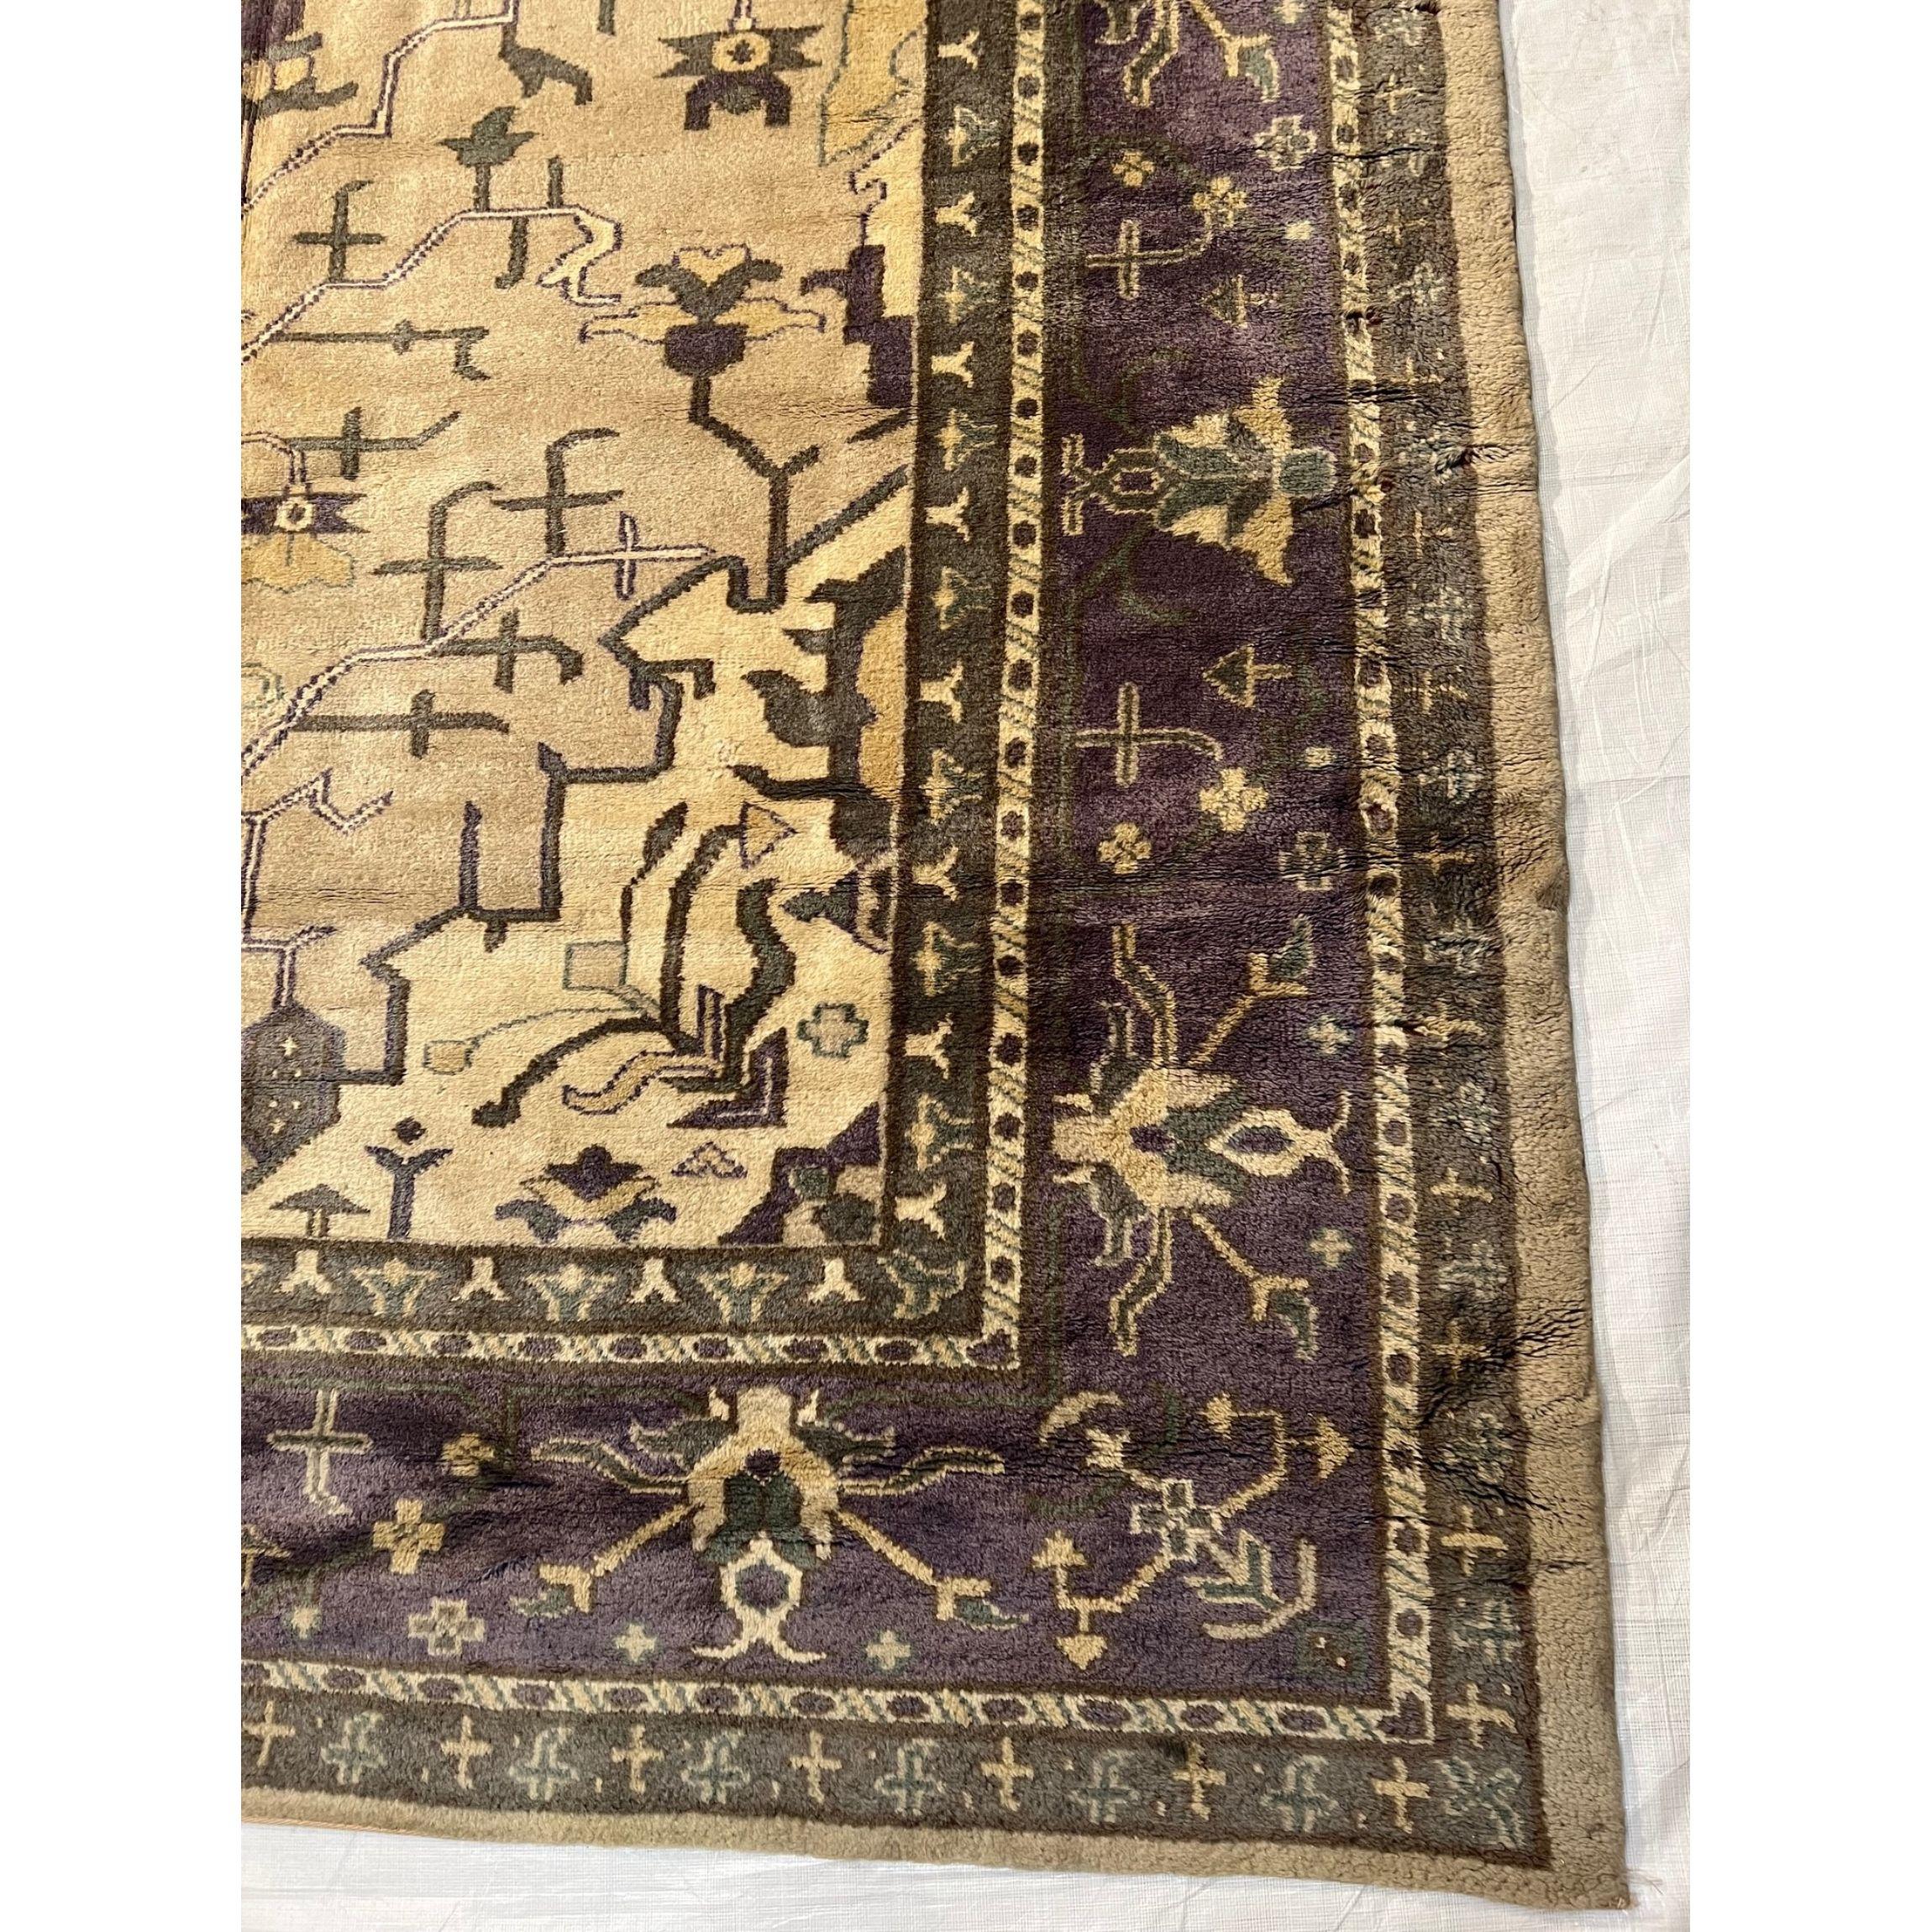 Antique Oushak Rug 11.2x9.2 In Good Condition For Sale In Los Angeles, US